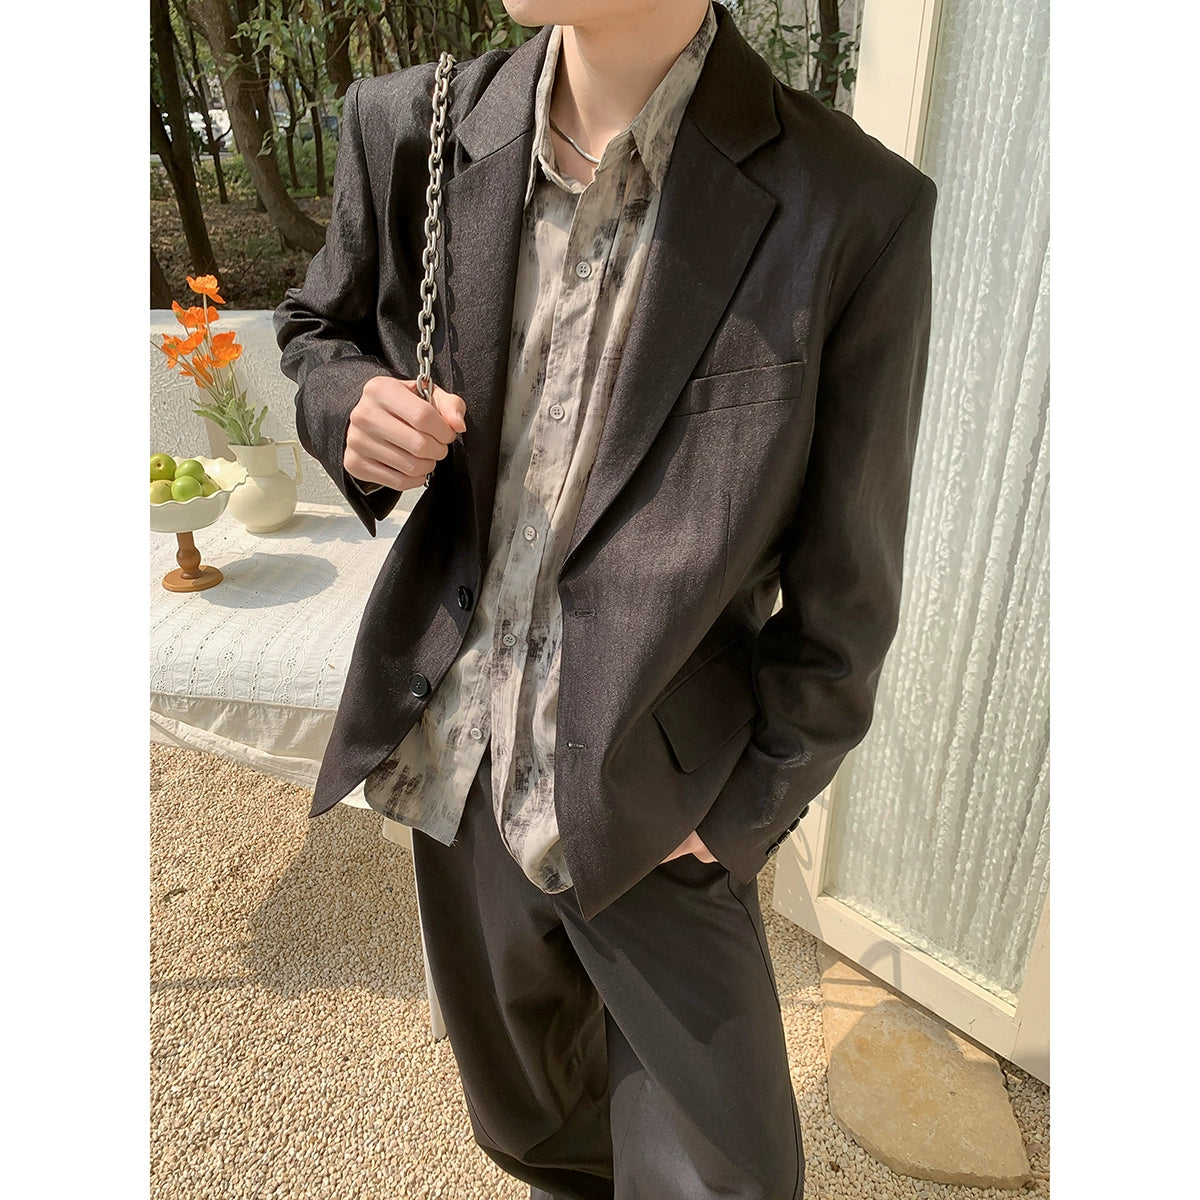 Baikouyang [Gilded Feast] Korean style luster light and thin suit, casual loose and versatile blazer